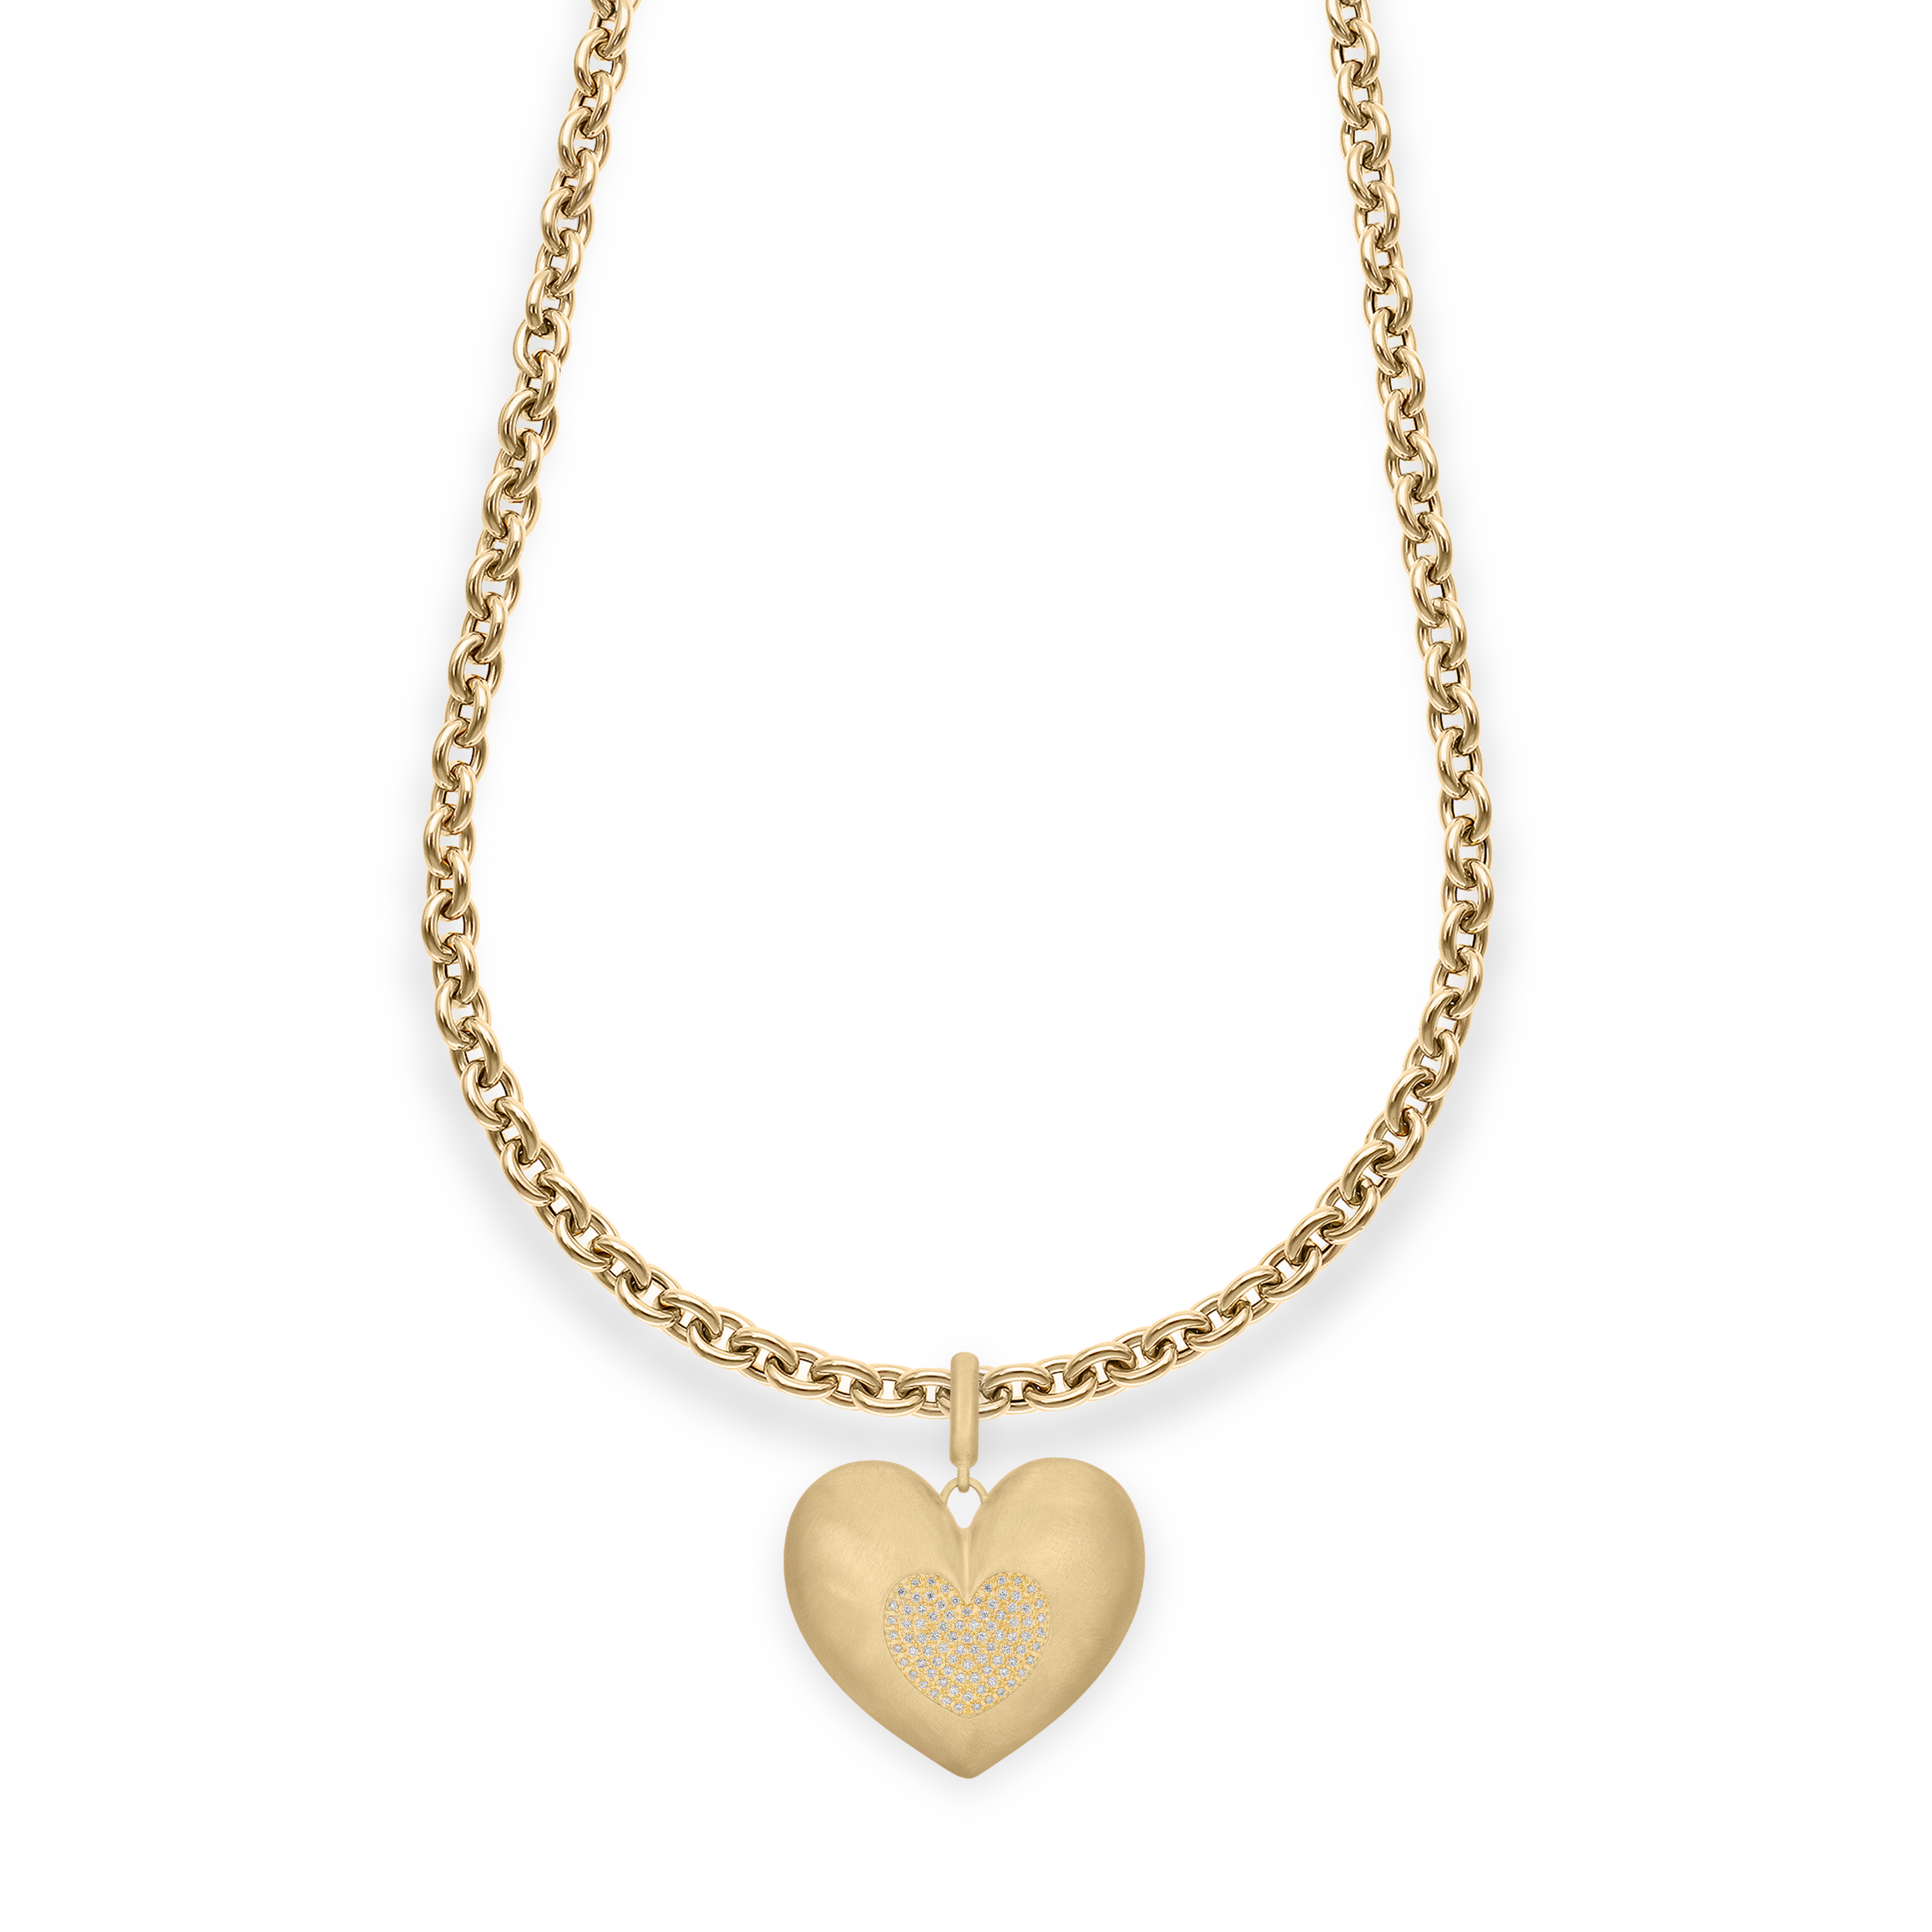 Paulette Brushed Yellow Gold Heart with Diamond Heart Pendant on Long Chain 